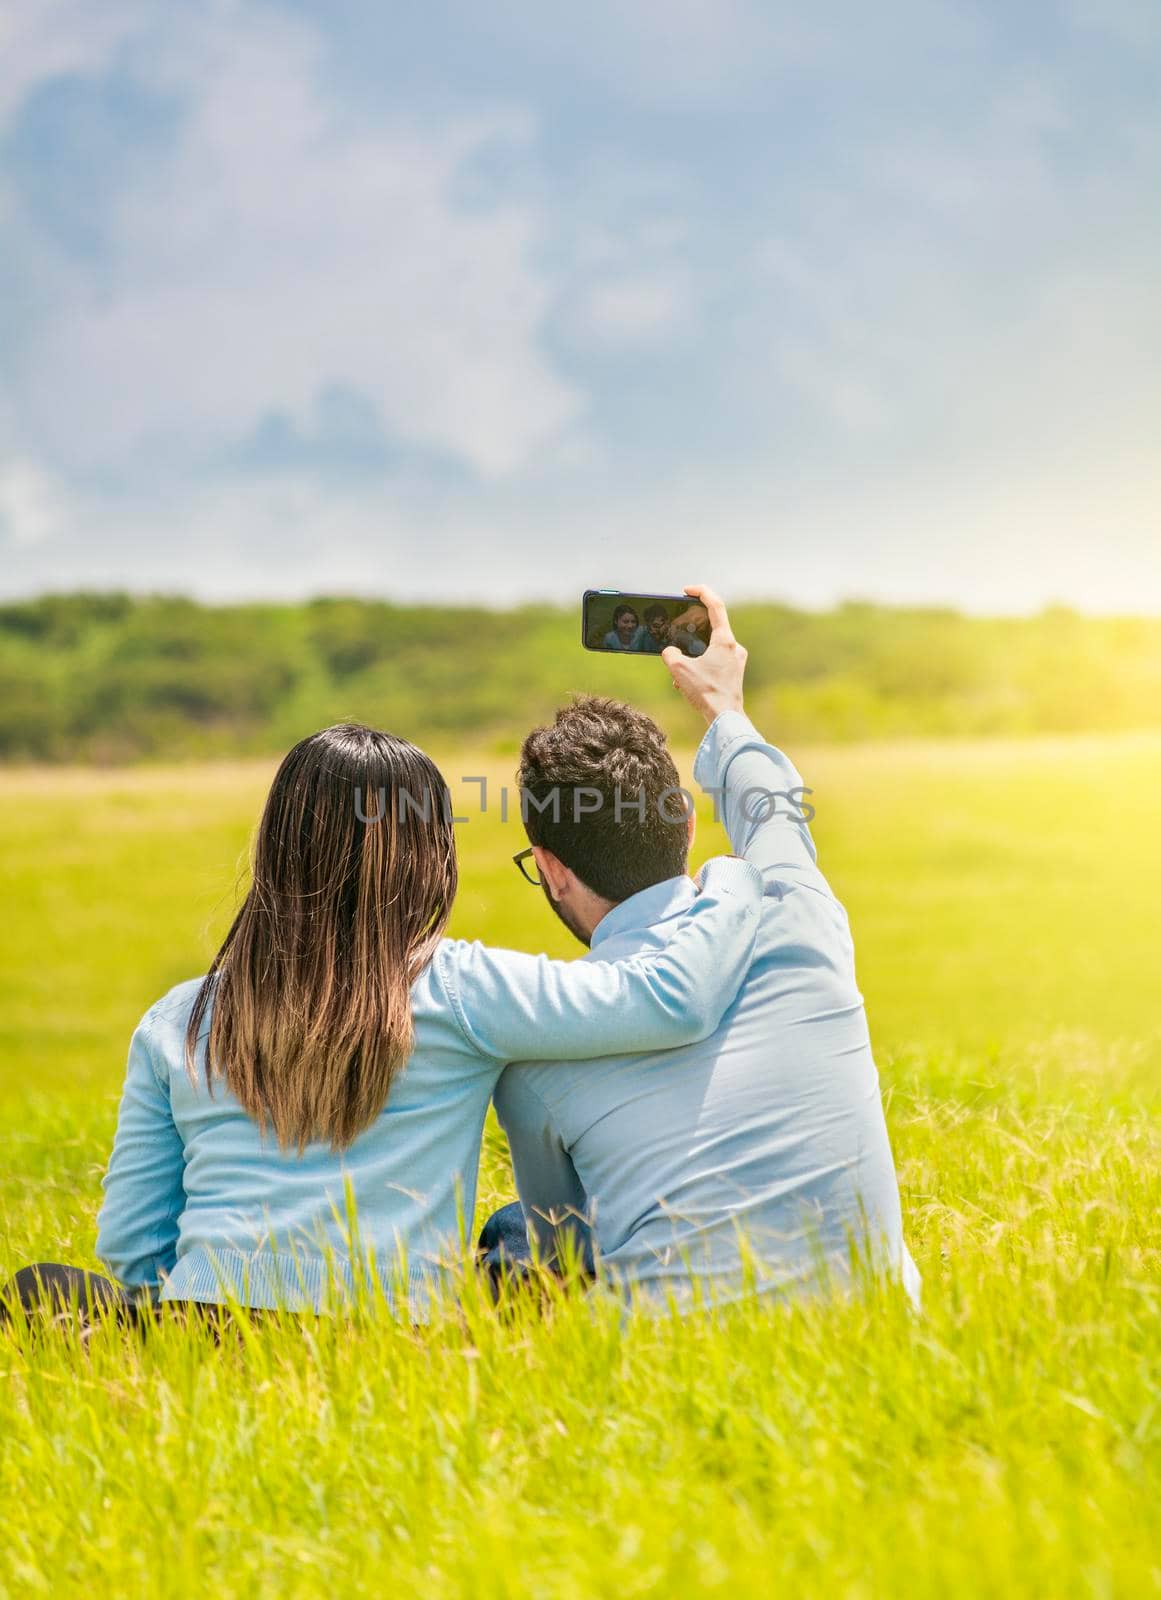 People in love taking selfies in the field with their smartphone, Smiling couple in love sitting on the grass taking selfies, Young couple in love taking a selfie in the field by isaiphoto